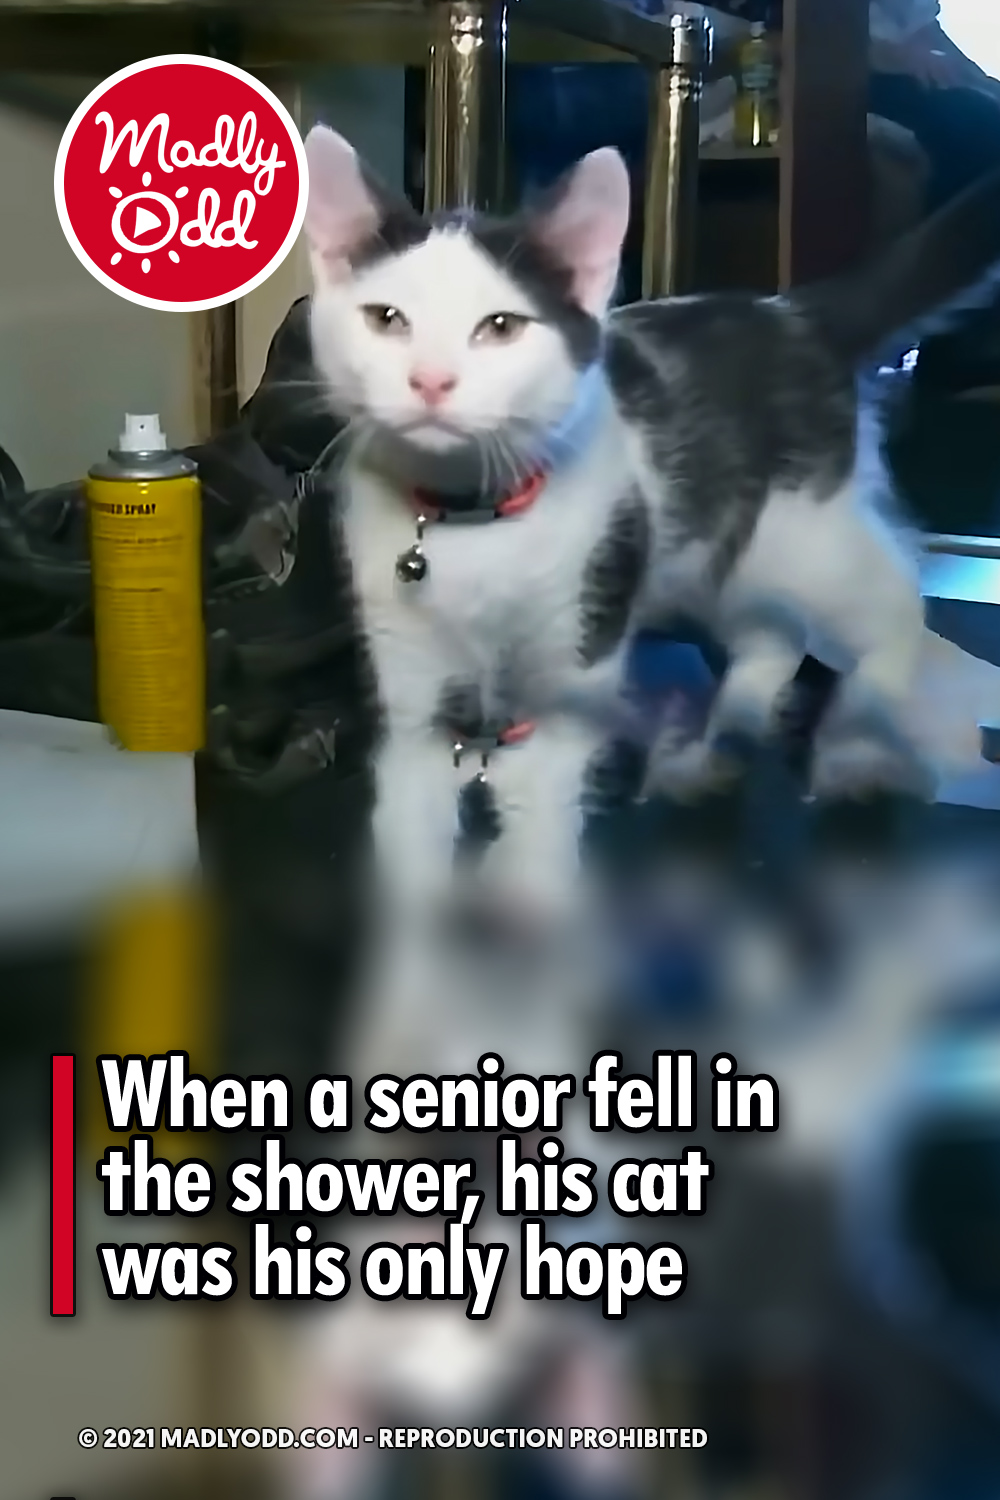 When a senior fell in the shower, his cat was his only hope